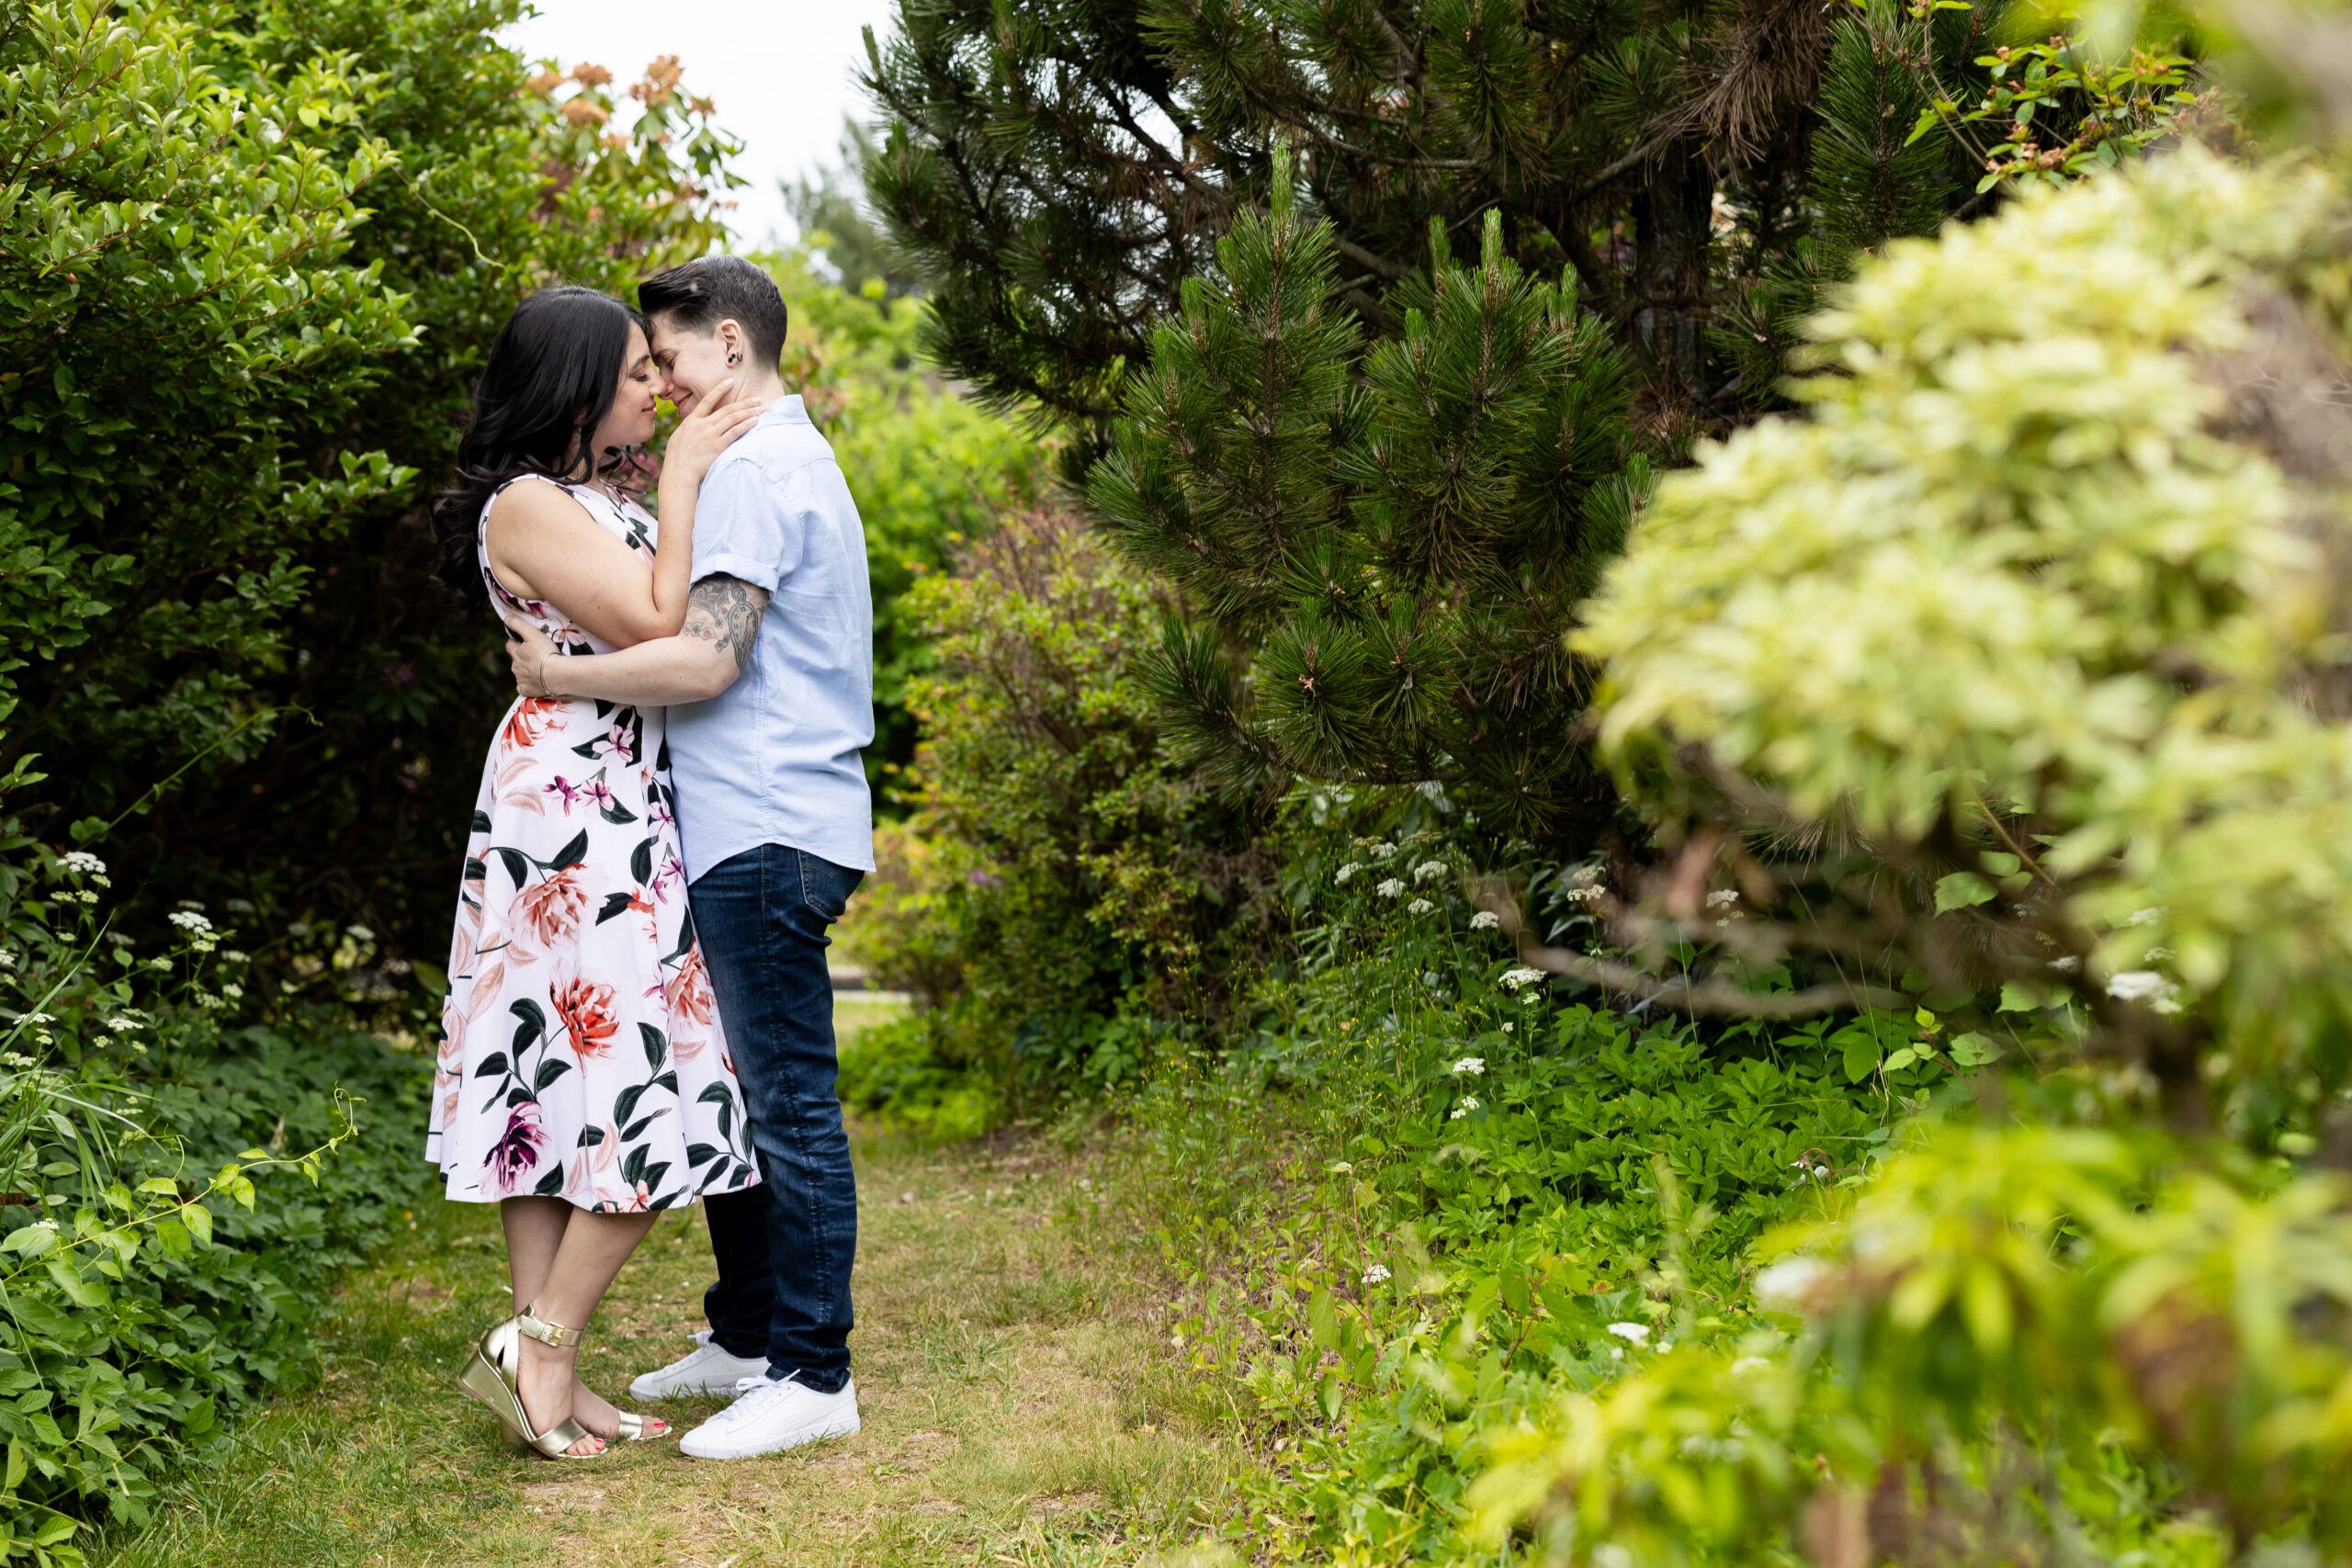 An engaged couple captured by New Jersey Wedding Photographer Jarot Bocanegra, kissing in a garden.